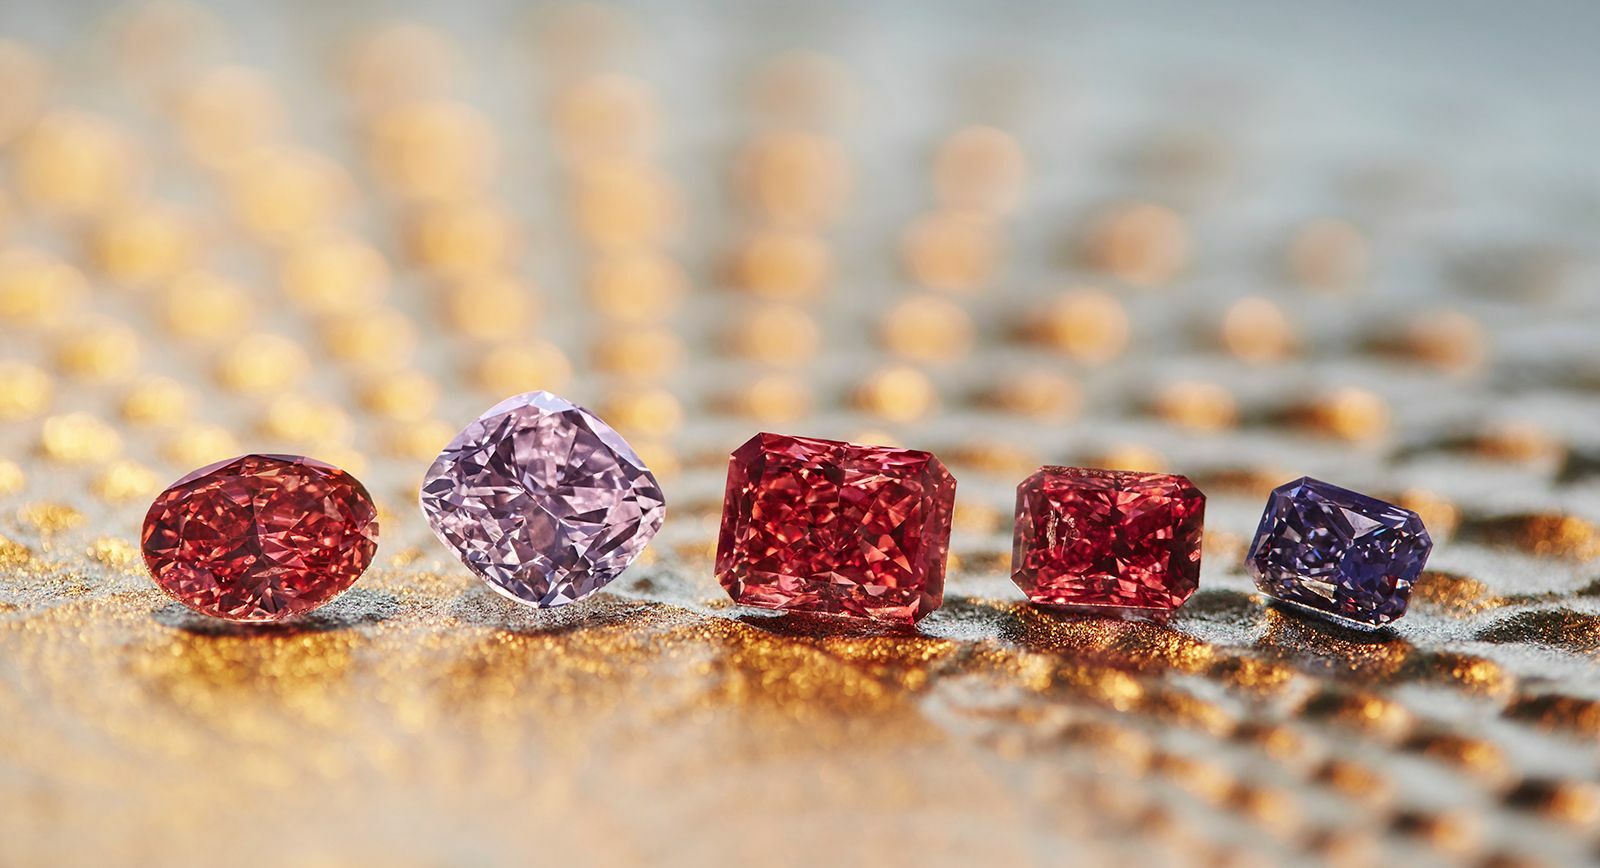 Rio Tinto presents ‘Custodians of Rare Beauty’ tender Rio Tinto presents ‘Custodians of Rare Beauty’ tender and the largest Fancy Red diamond in the history of the Argyle Pink Diamonds Tender